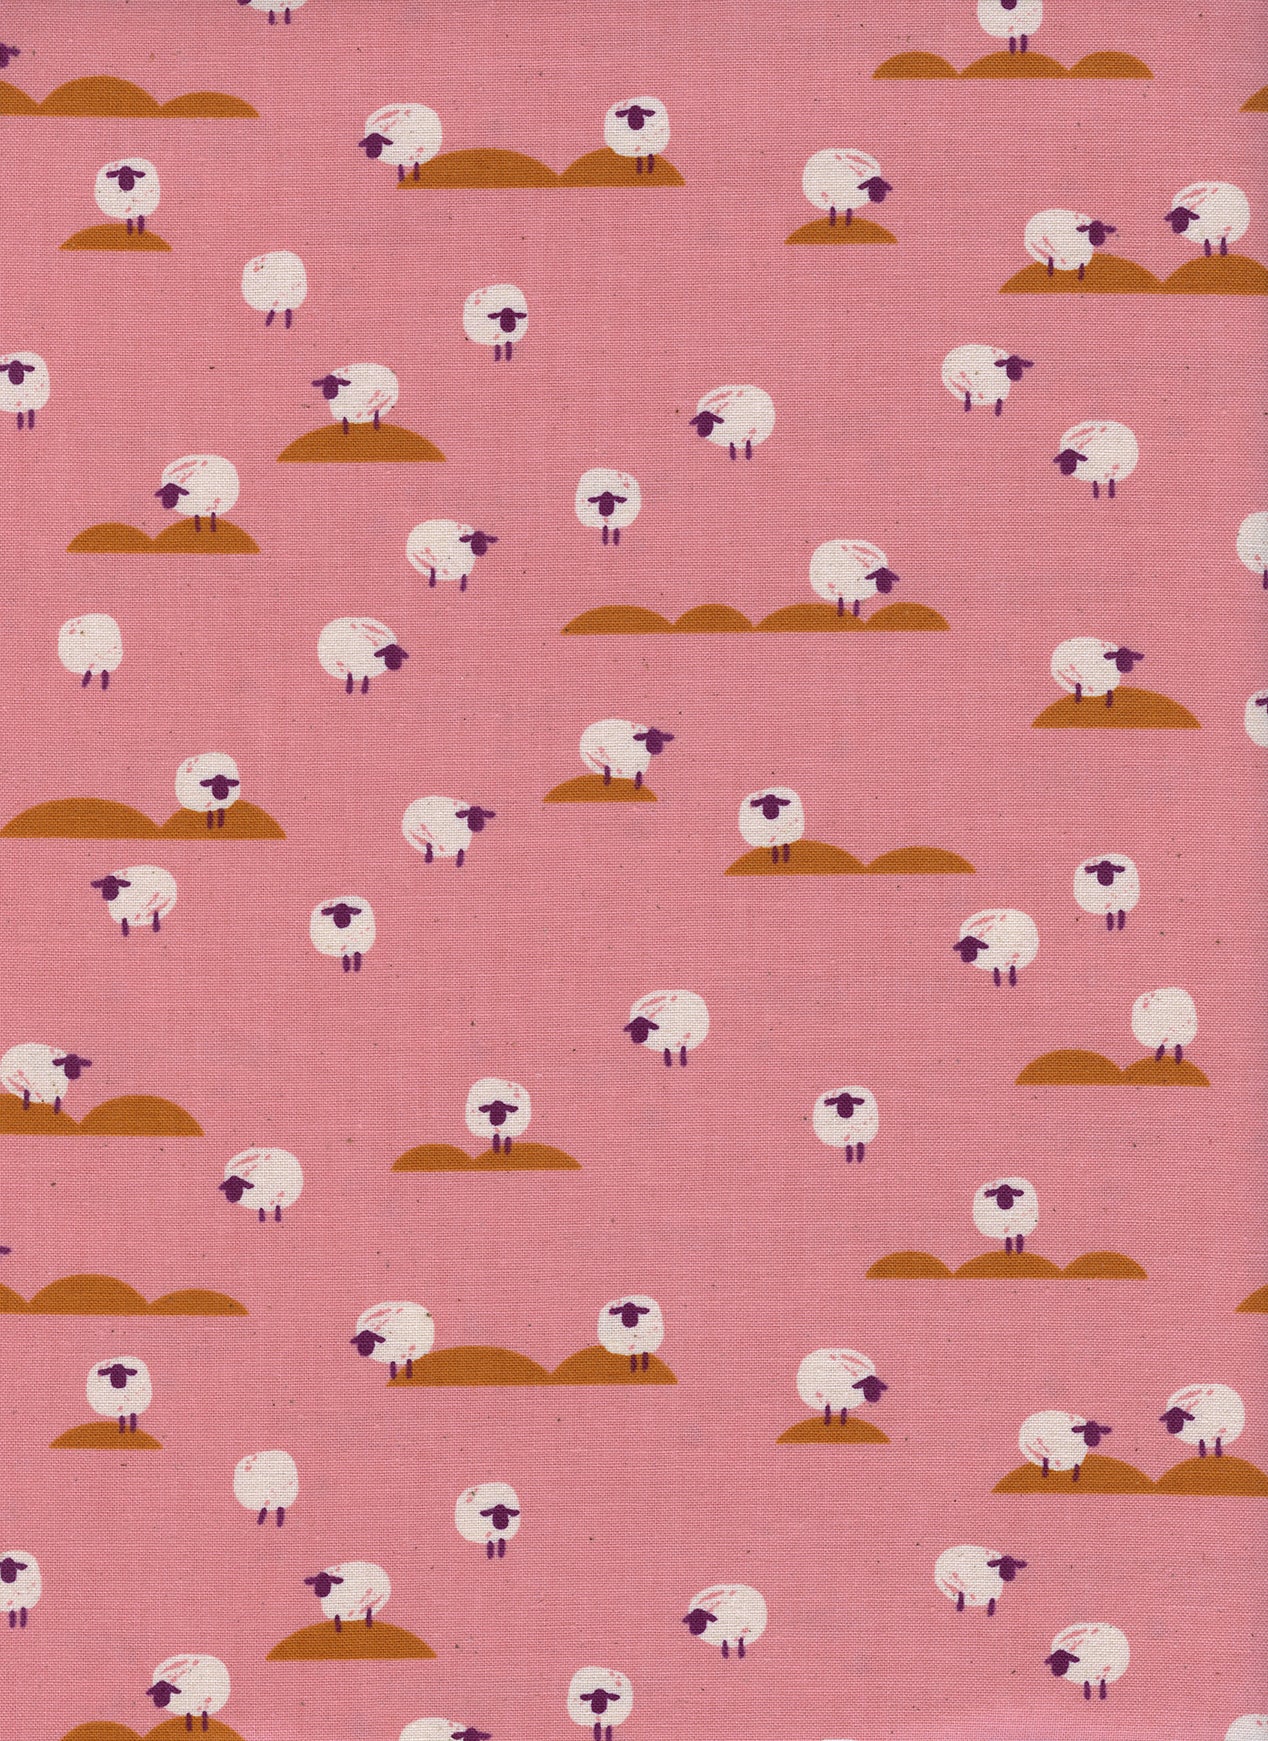 C+S Panorama - Sheep - Coral Unbleached Cotton Fabric